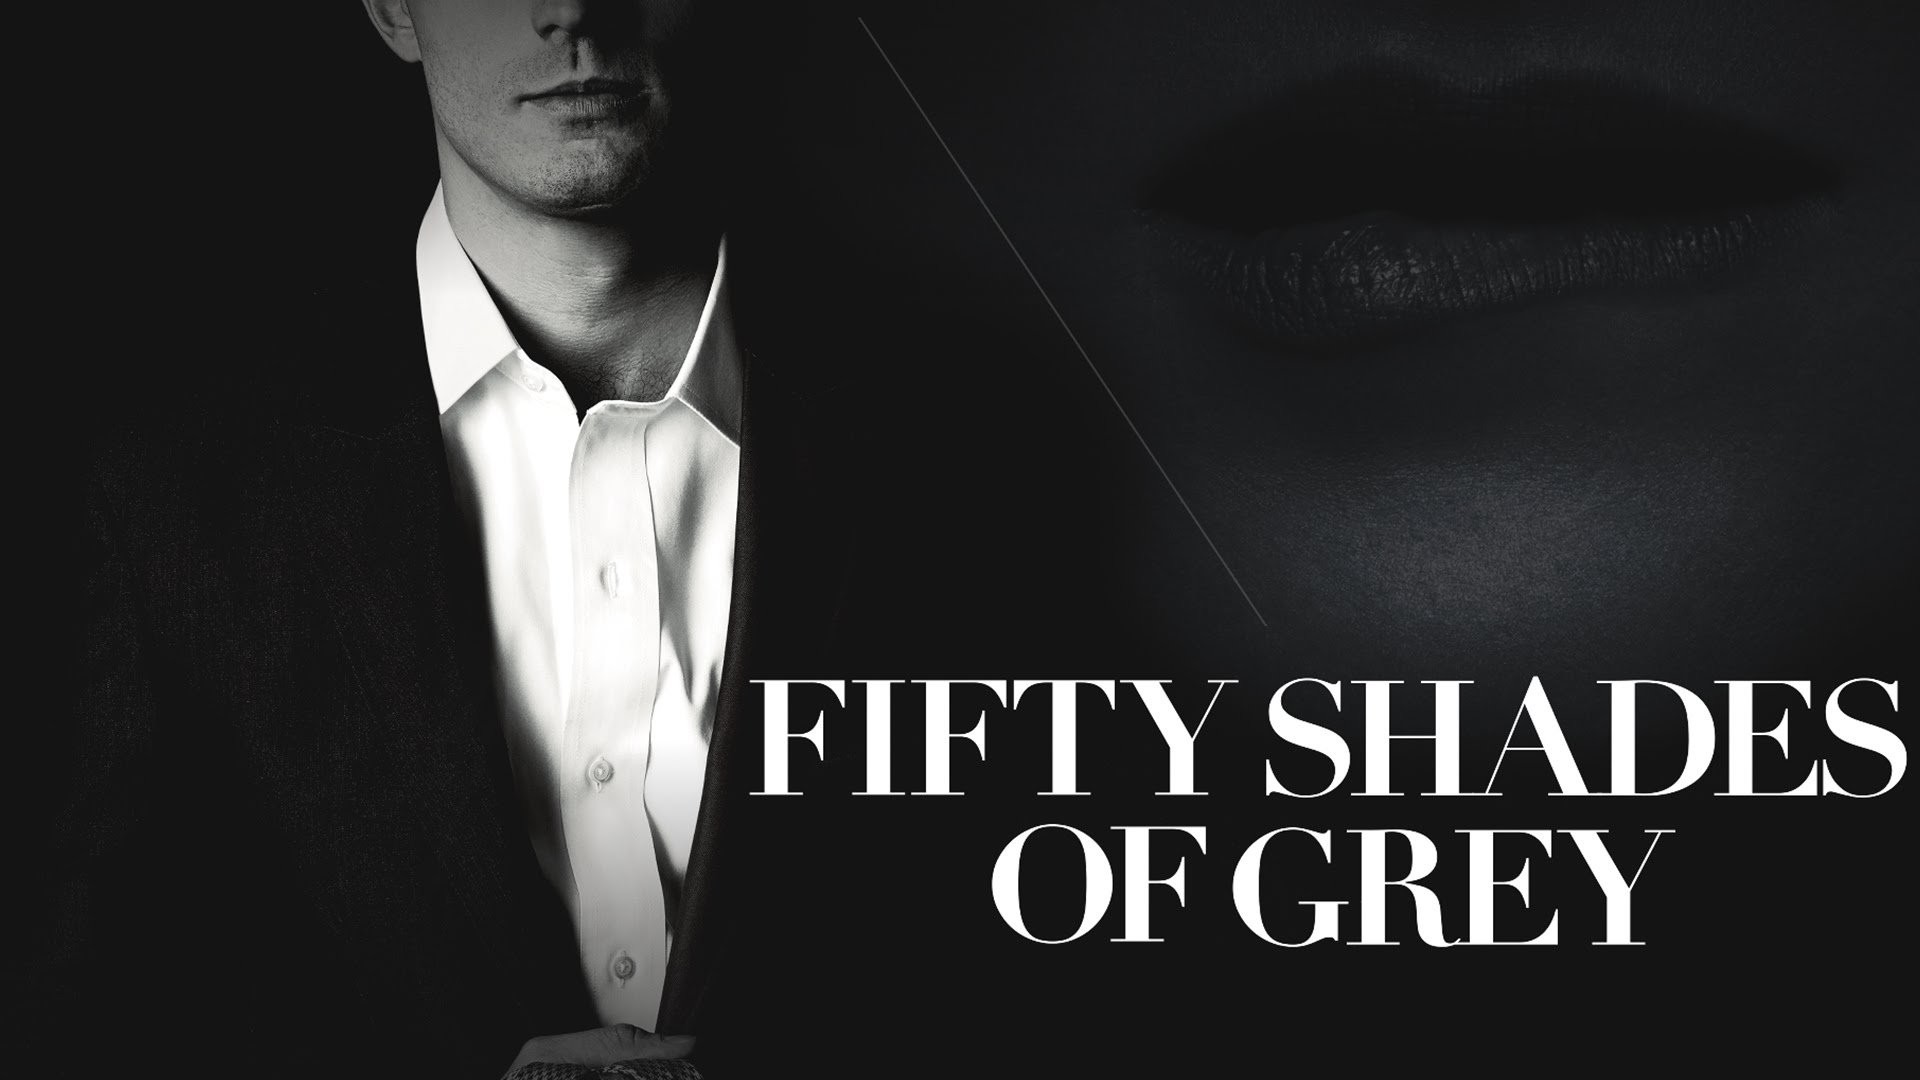 1920x1080 Fifty Shades of Grey Wallpaper 48753